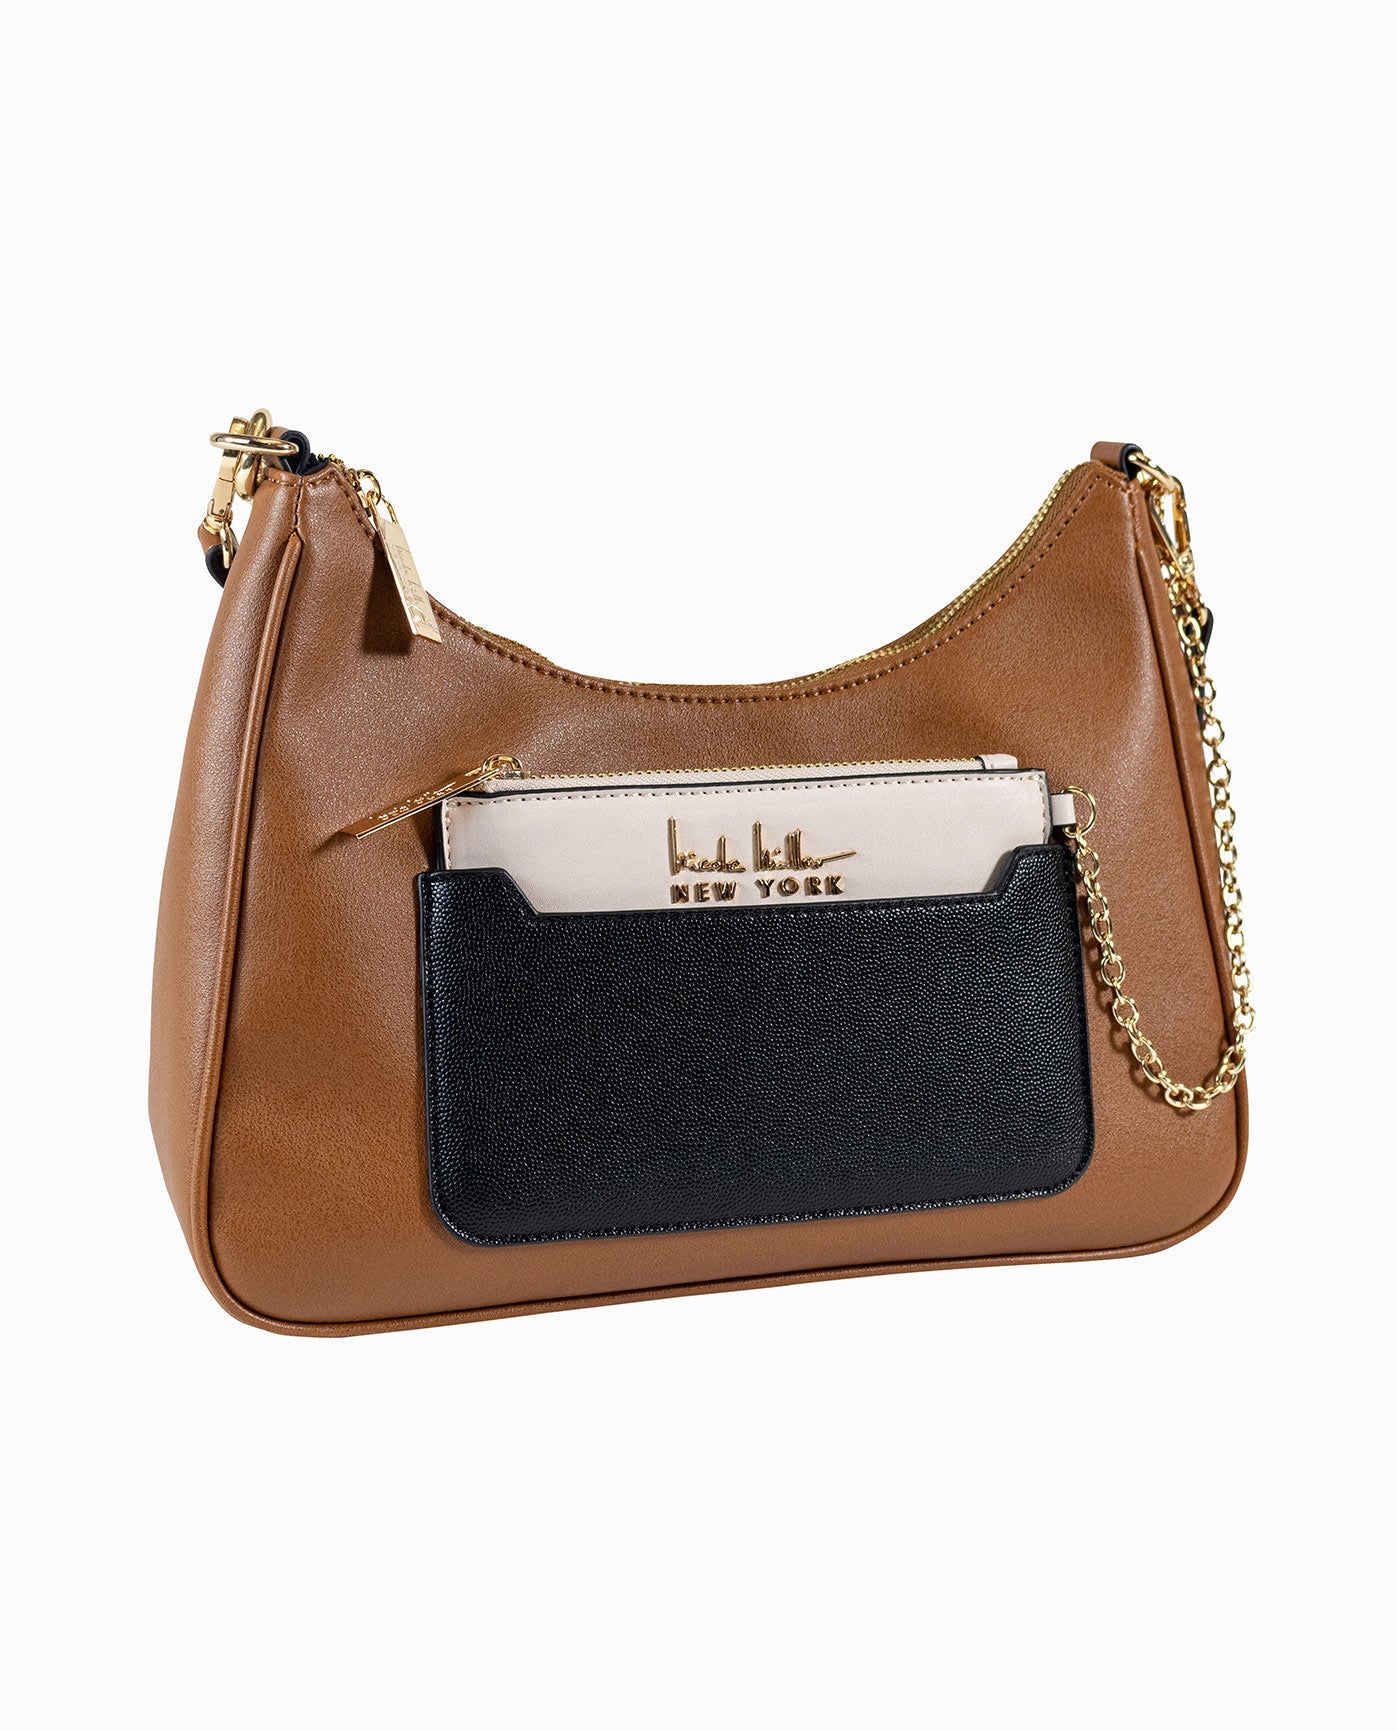 Crossbody Shoulder Bag with Coordinating Light Tan Coin Purse and Gold Details | Tan